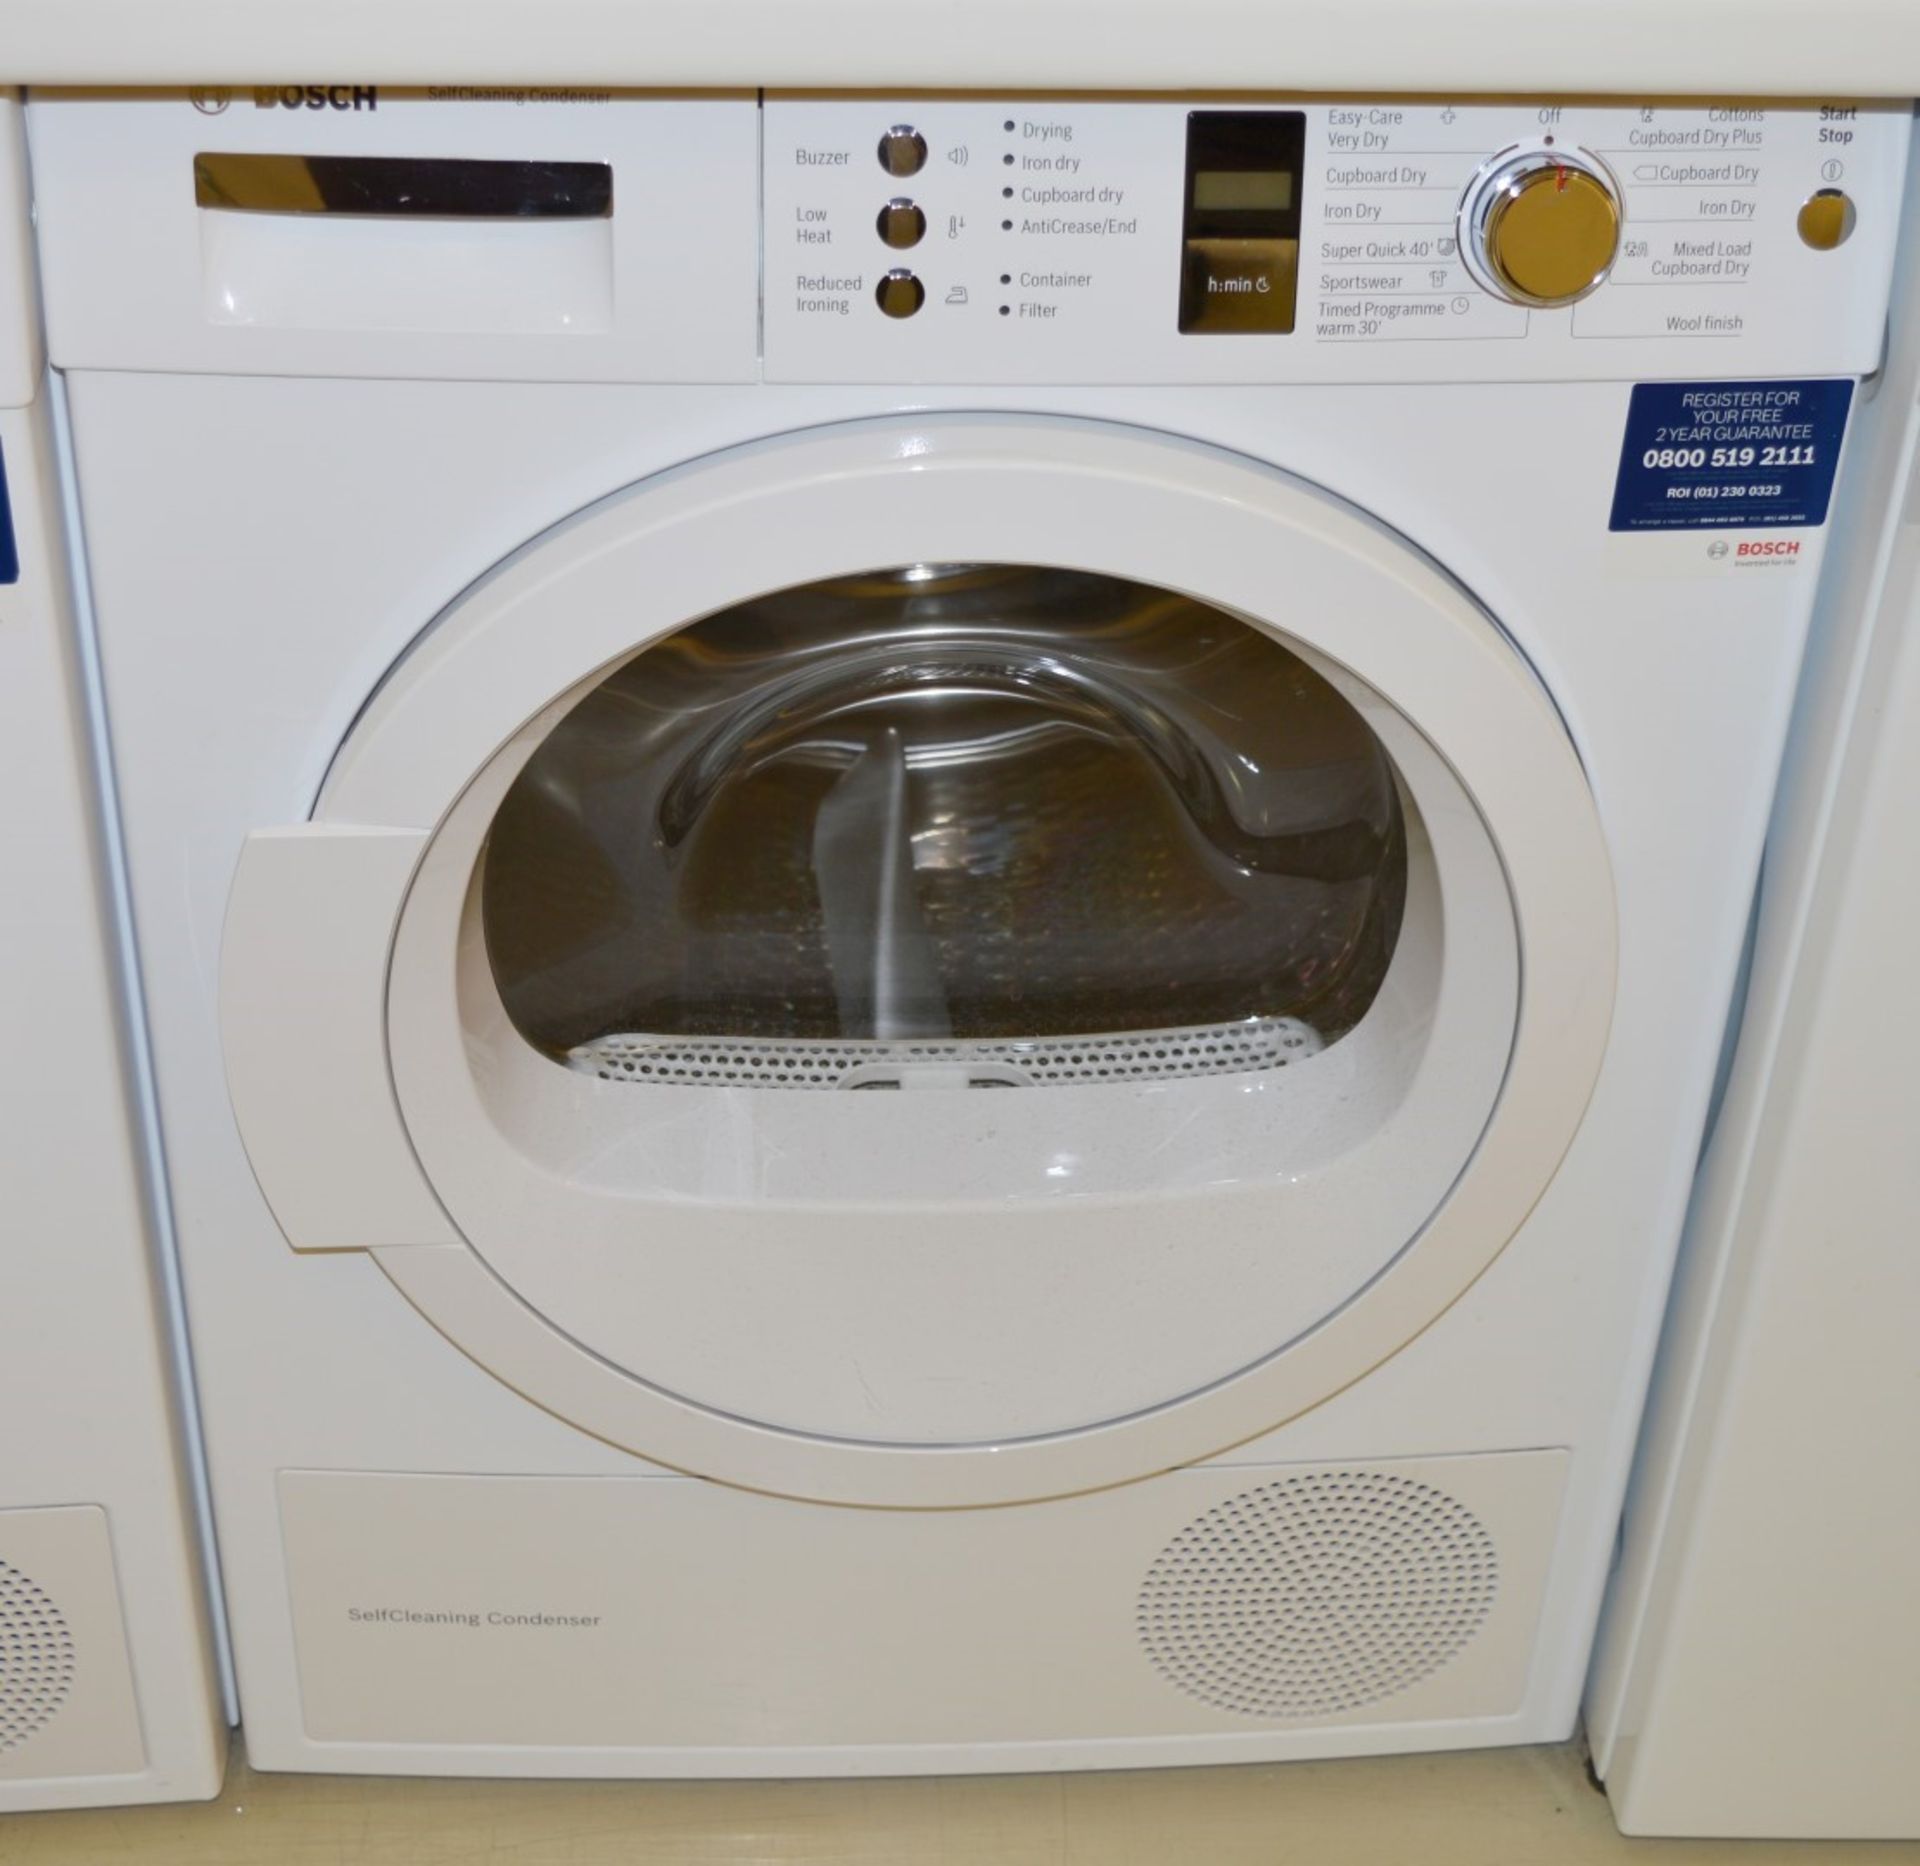 1 x Bosch 7kg Load Capacity Self Cleaning Condenser Tumble Dryer - Model WTW863S1GB - A++ Energy